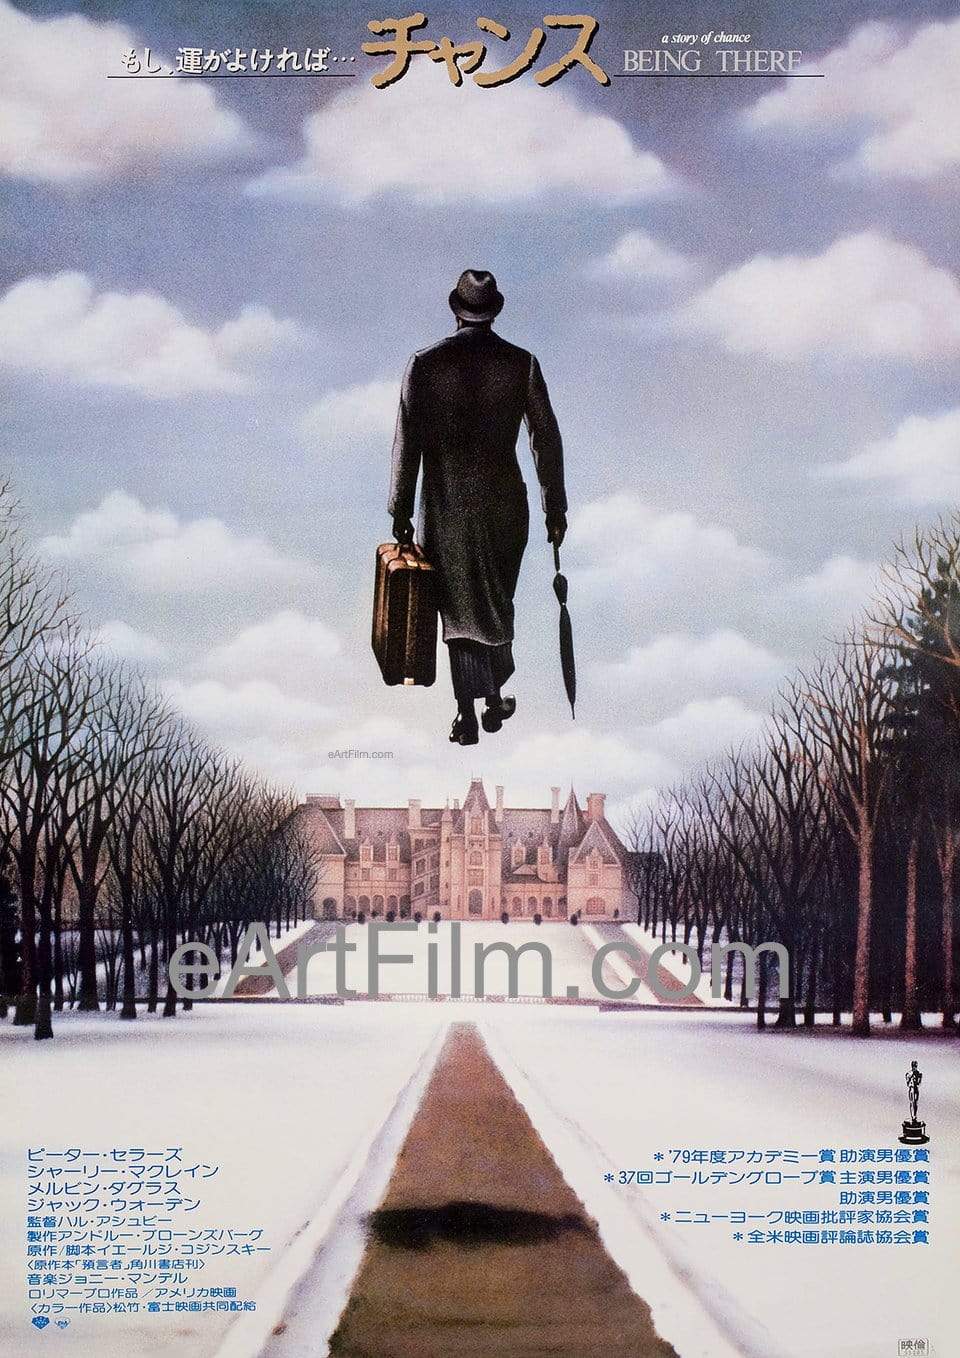 eArtFilm.com Japanese Style A (20.25"x28 5/8") Being There 1980 20x28 Original Japanese Release Movie Poster-Peter Sellers